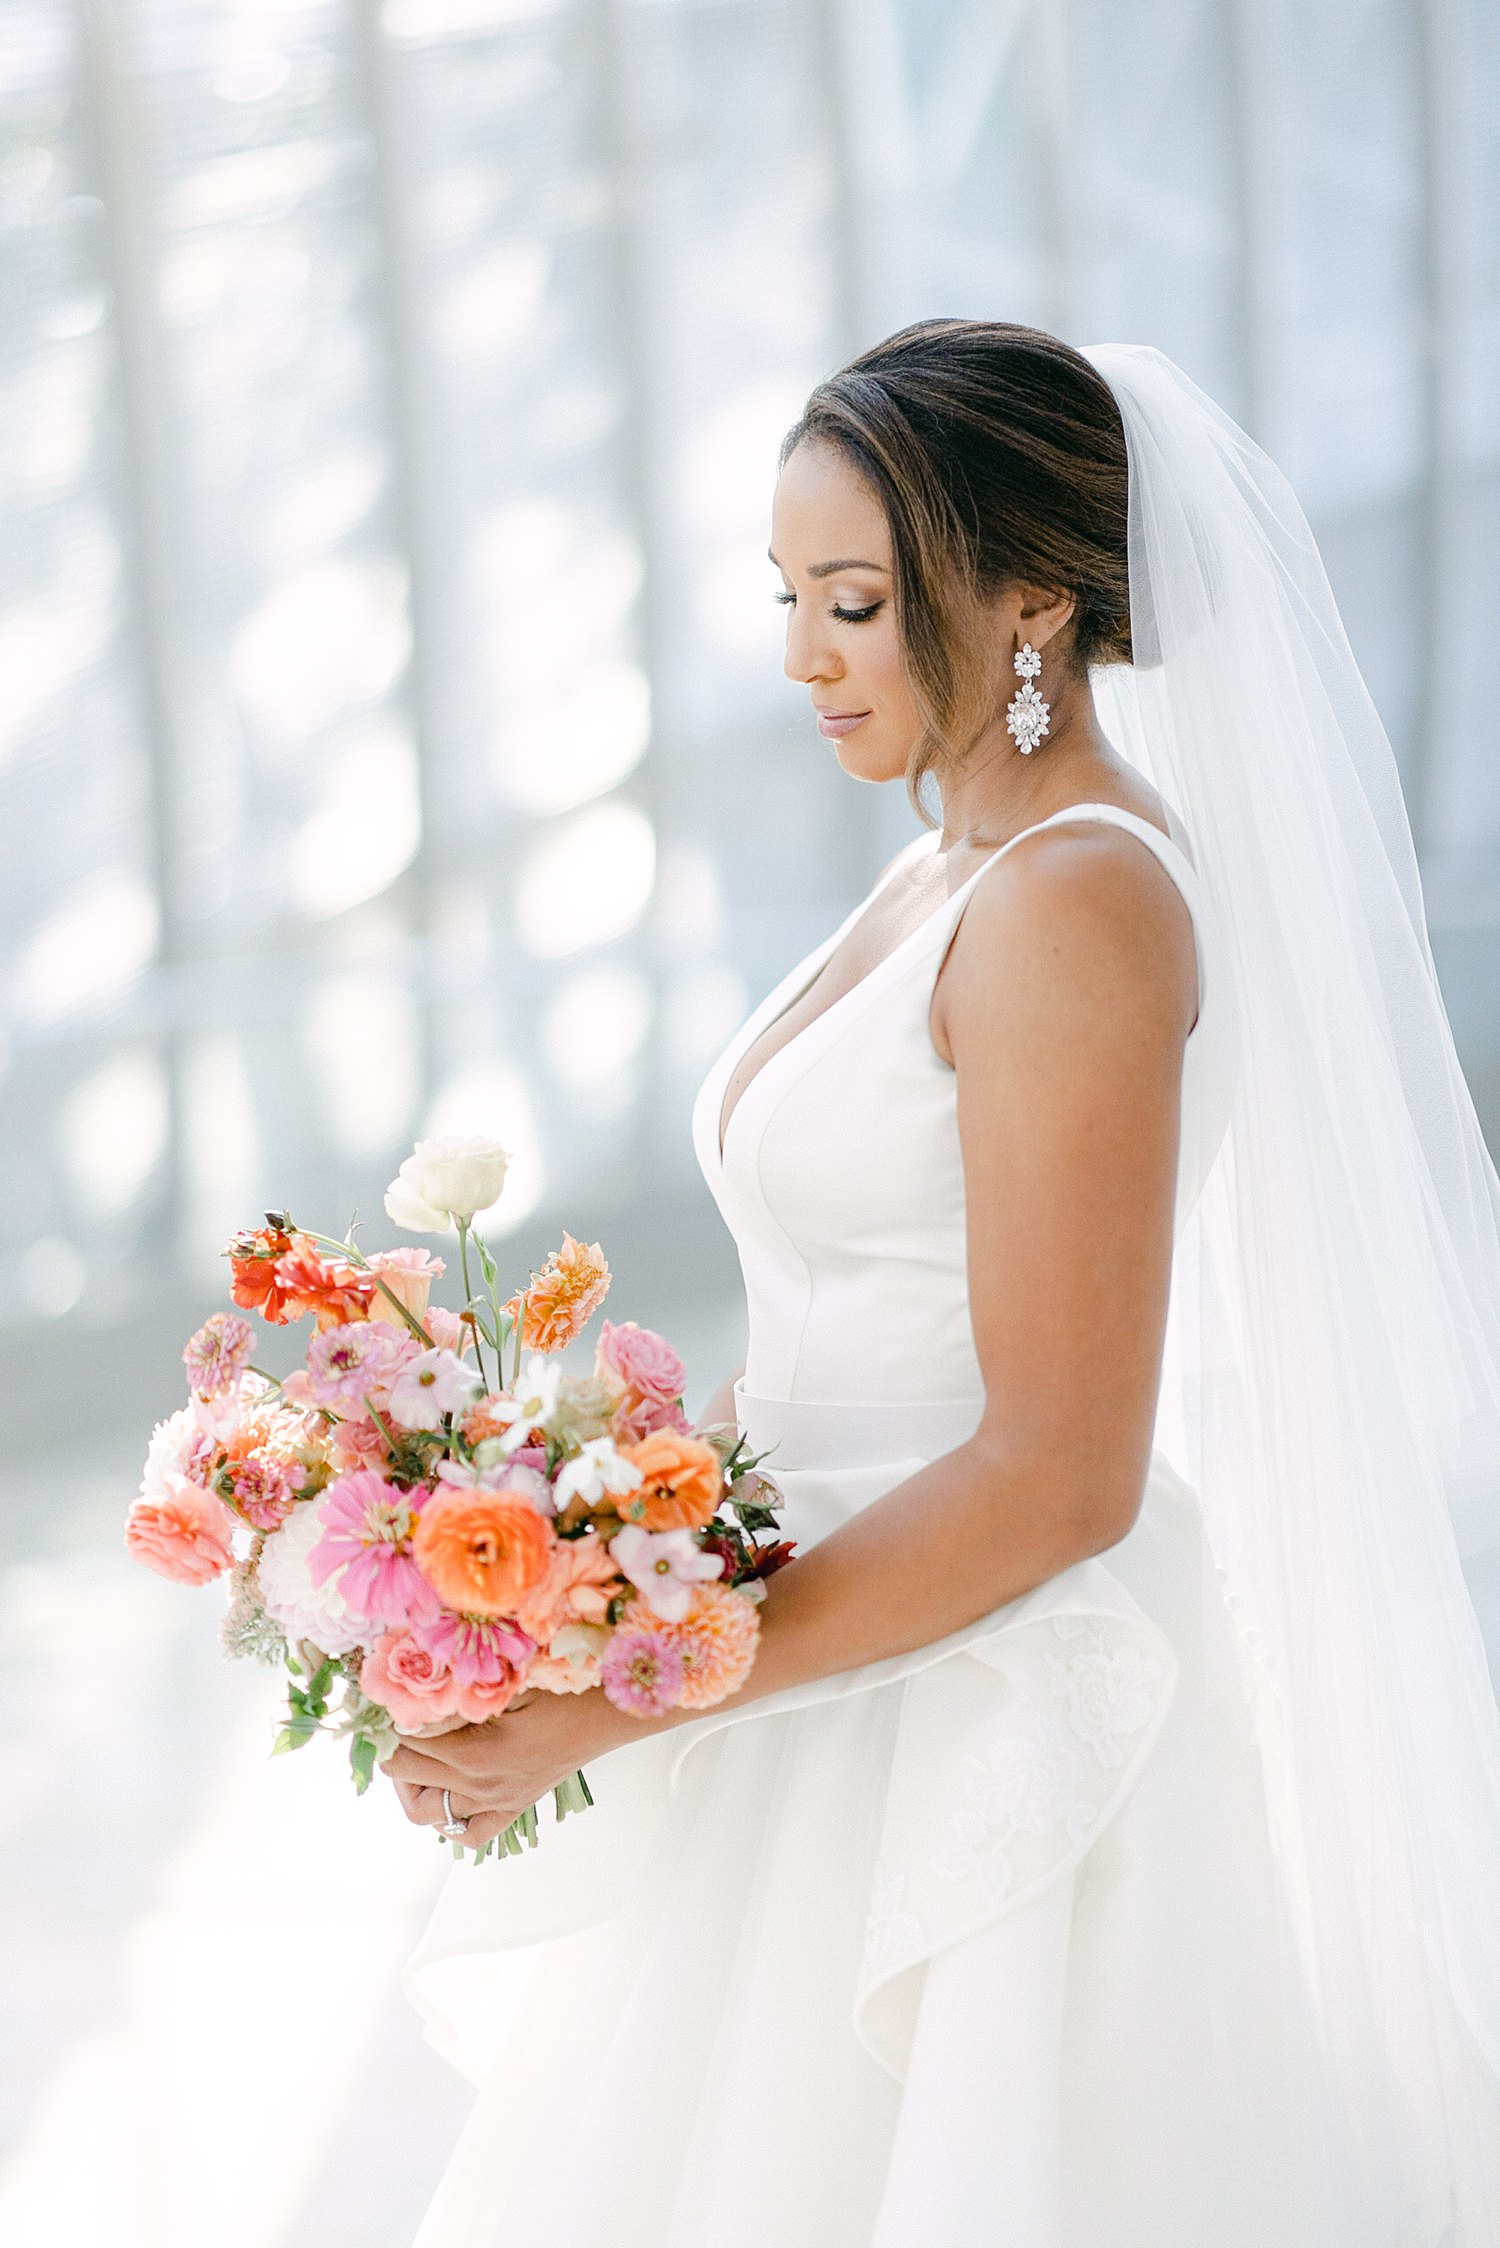 Bride in white wedding dress looking at colorful floral bouquet